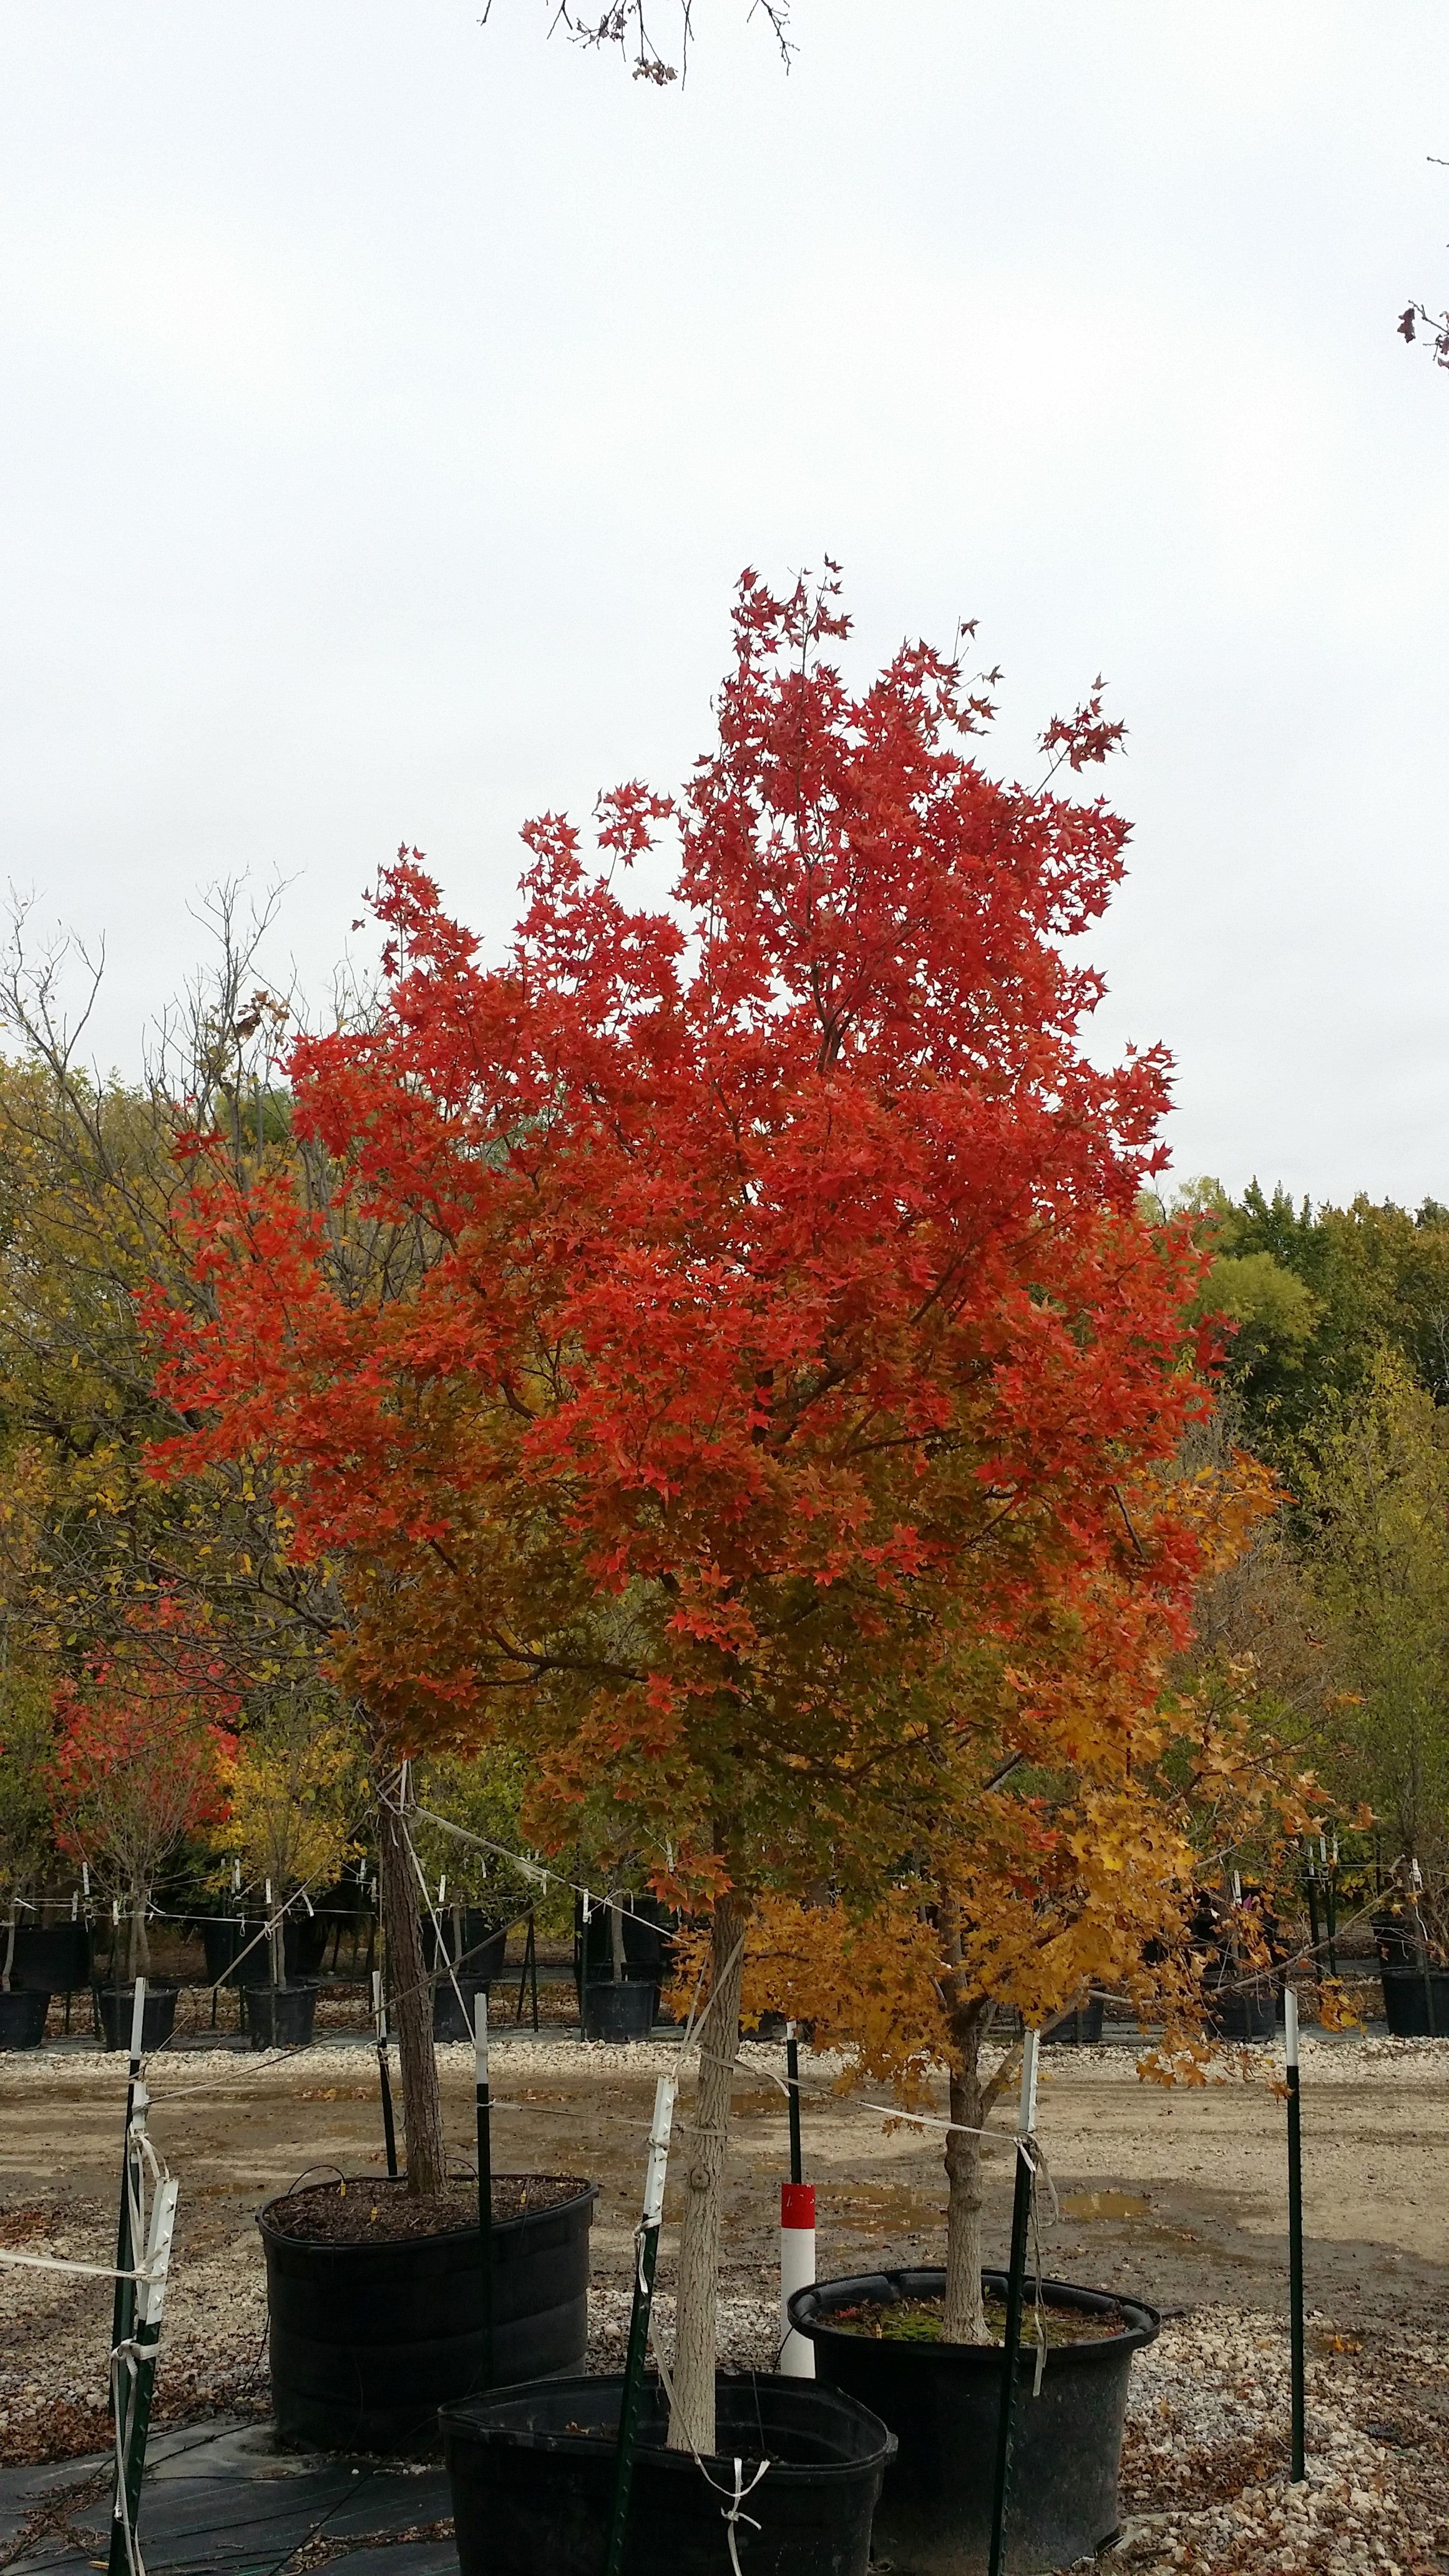 Flame Maple Trees For Sale at Ty Ty Nursery